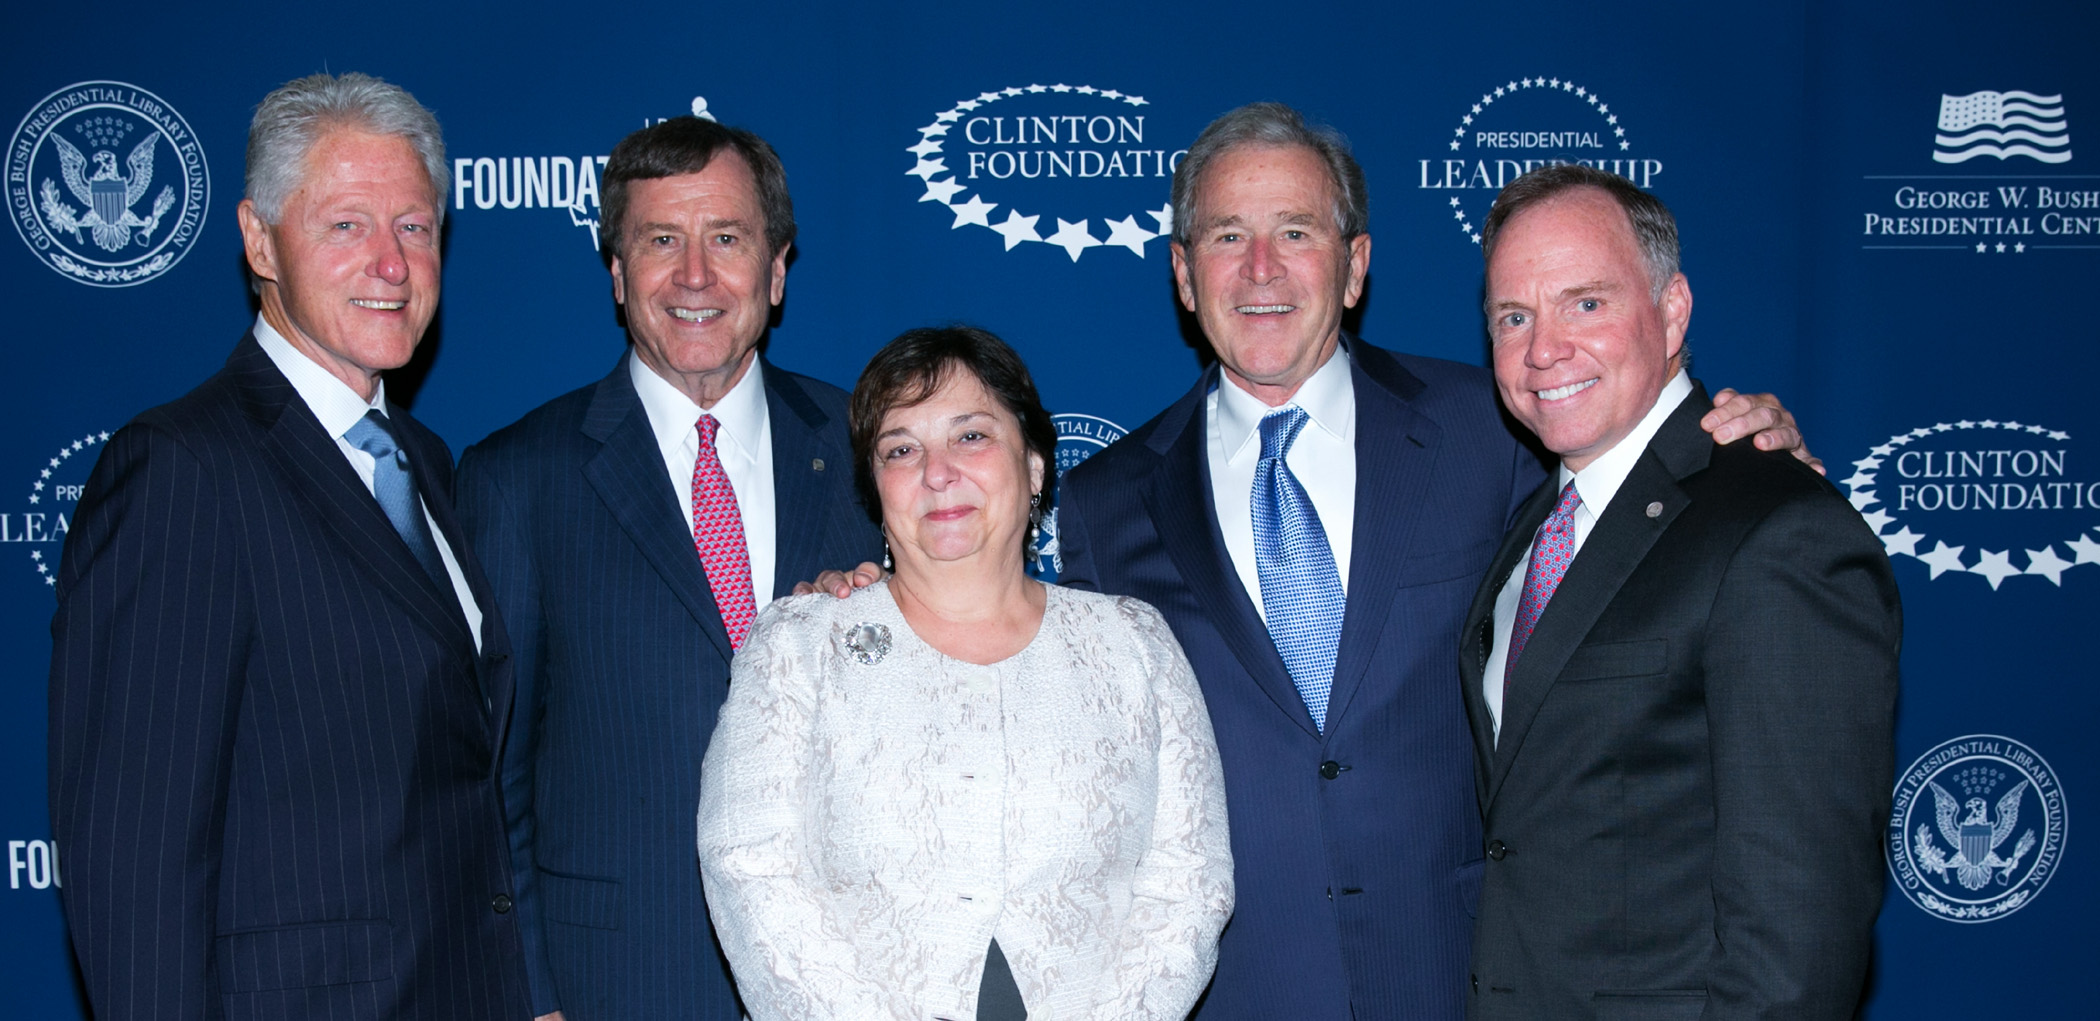 Linda S. Eads with President Bill Clinton, SMU President R. Gerald Turner, President George W. Bush and SMU Vice President for Development and External Affairs Brad Cheves. 